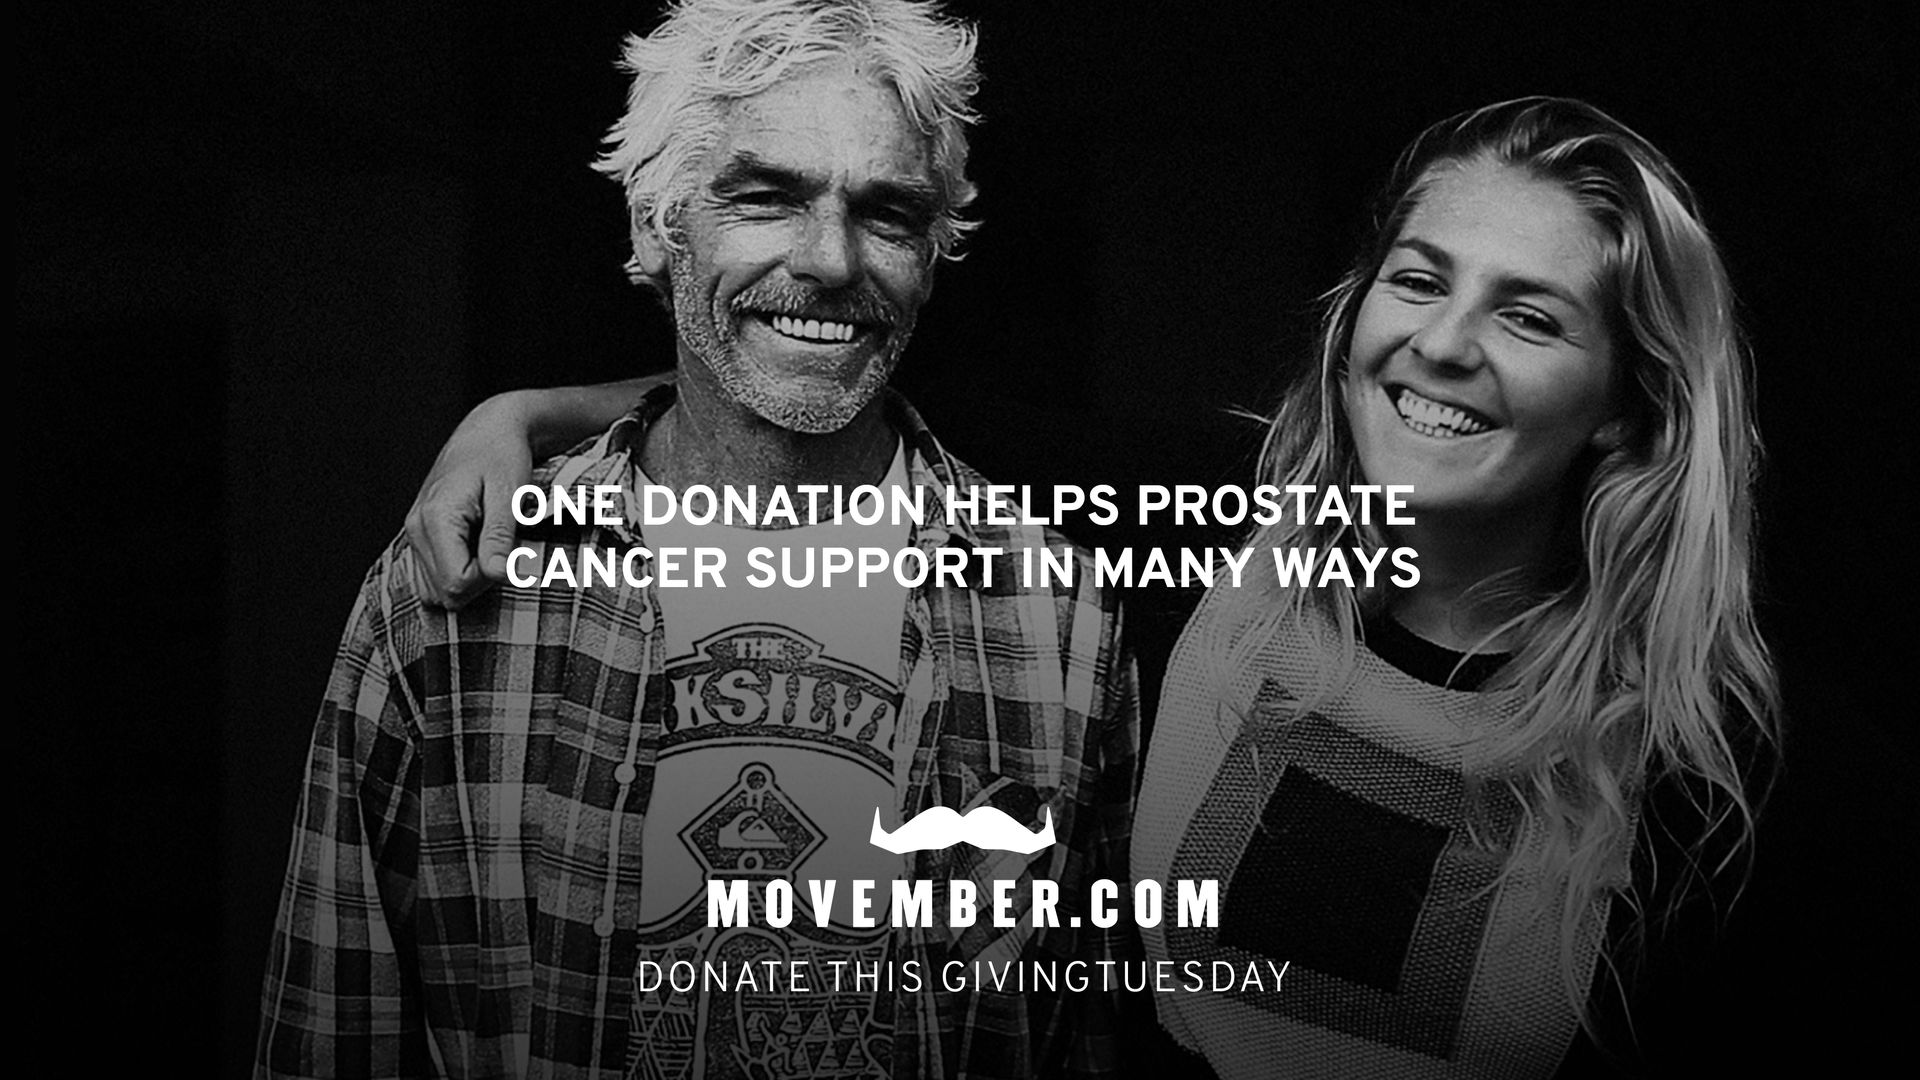 "One donation helps prostate cancer support in many ways"